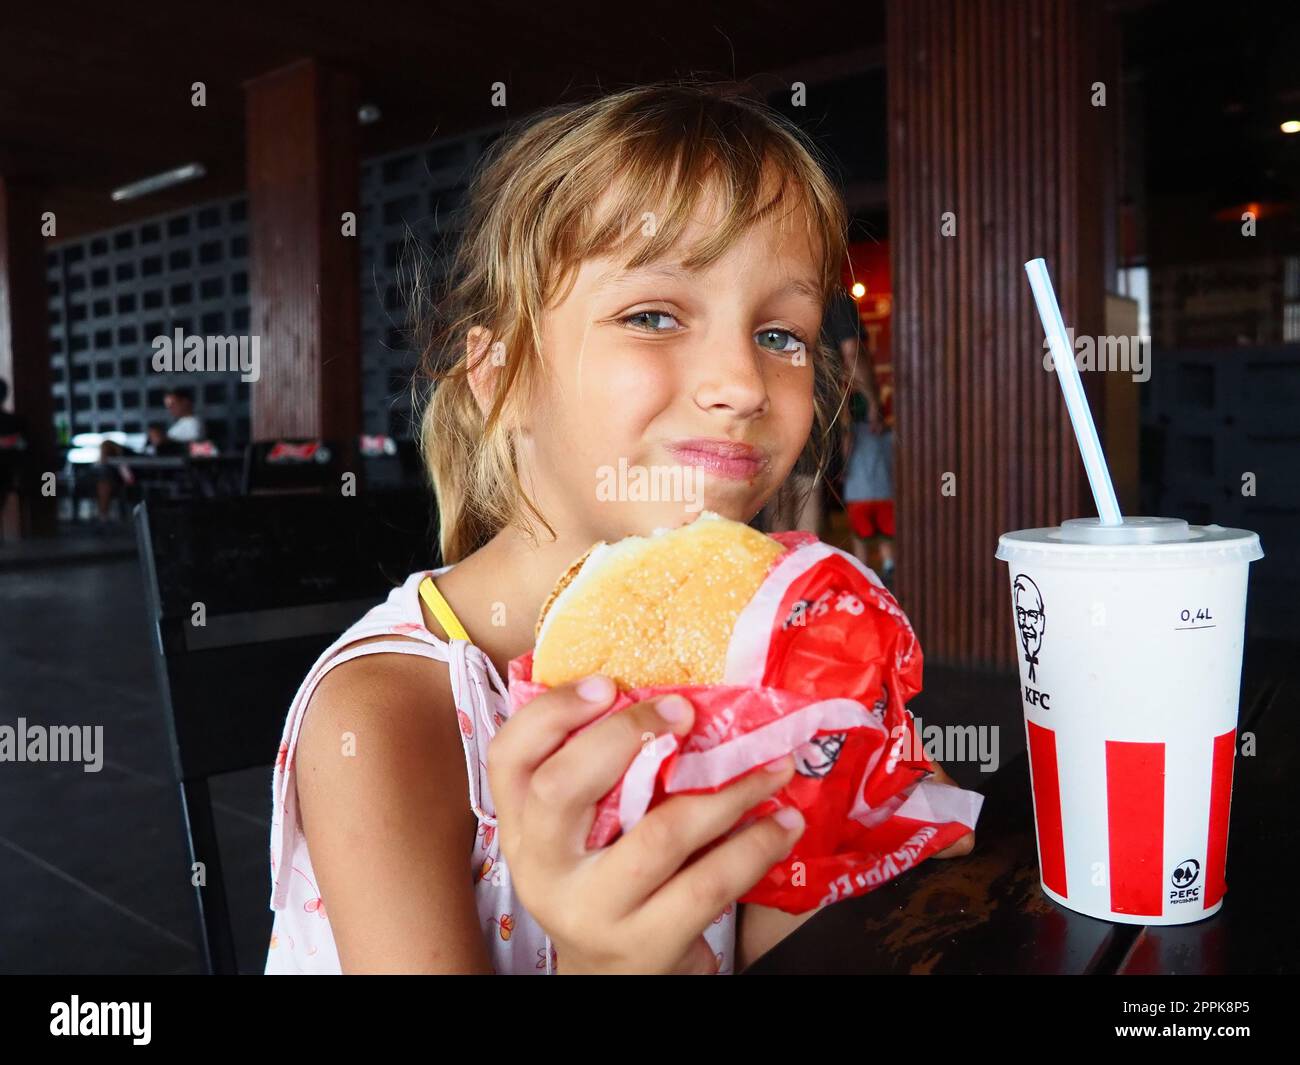 Anapa Russia 23 August 2021 A beautiful girl of 7 years old is eating at the KFC restaurant enjoying the food and smiling. Caucasian child holding a burger. Cola in a cardboard cup with lid and straw Stock Photo